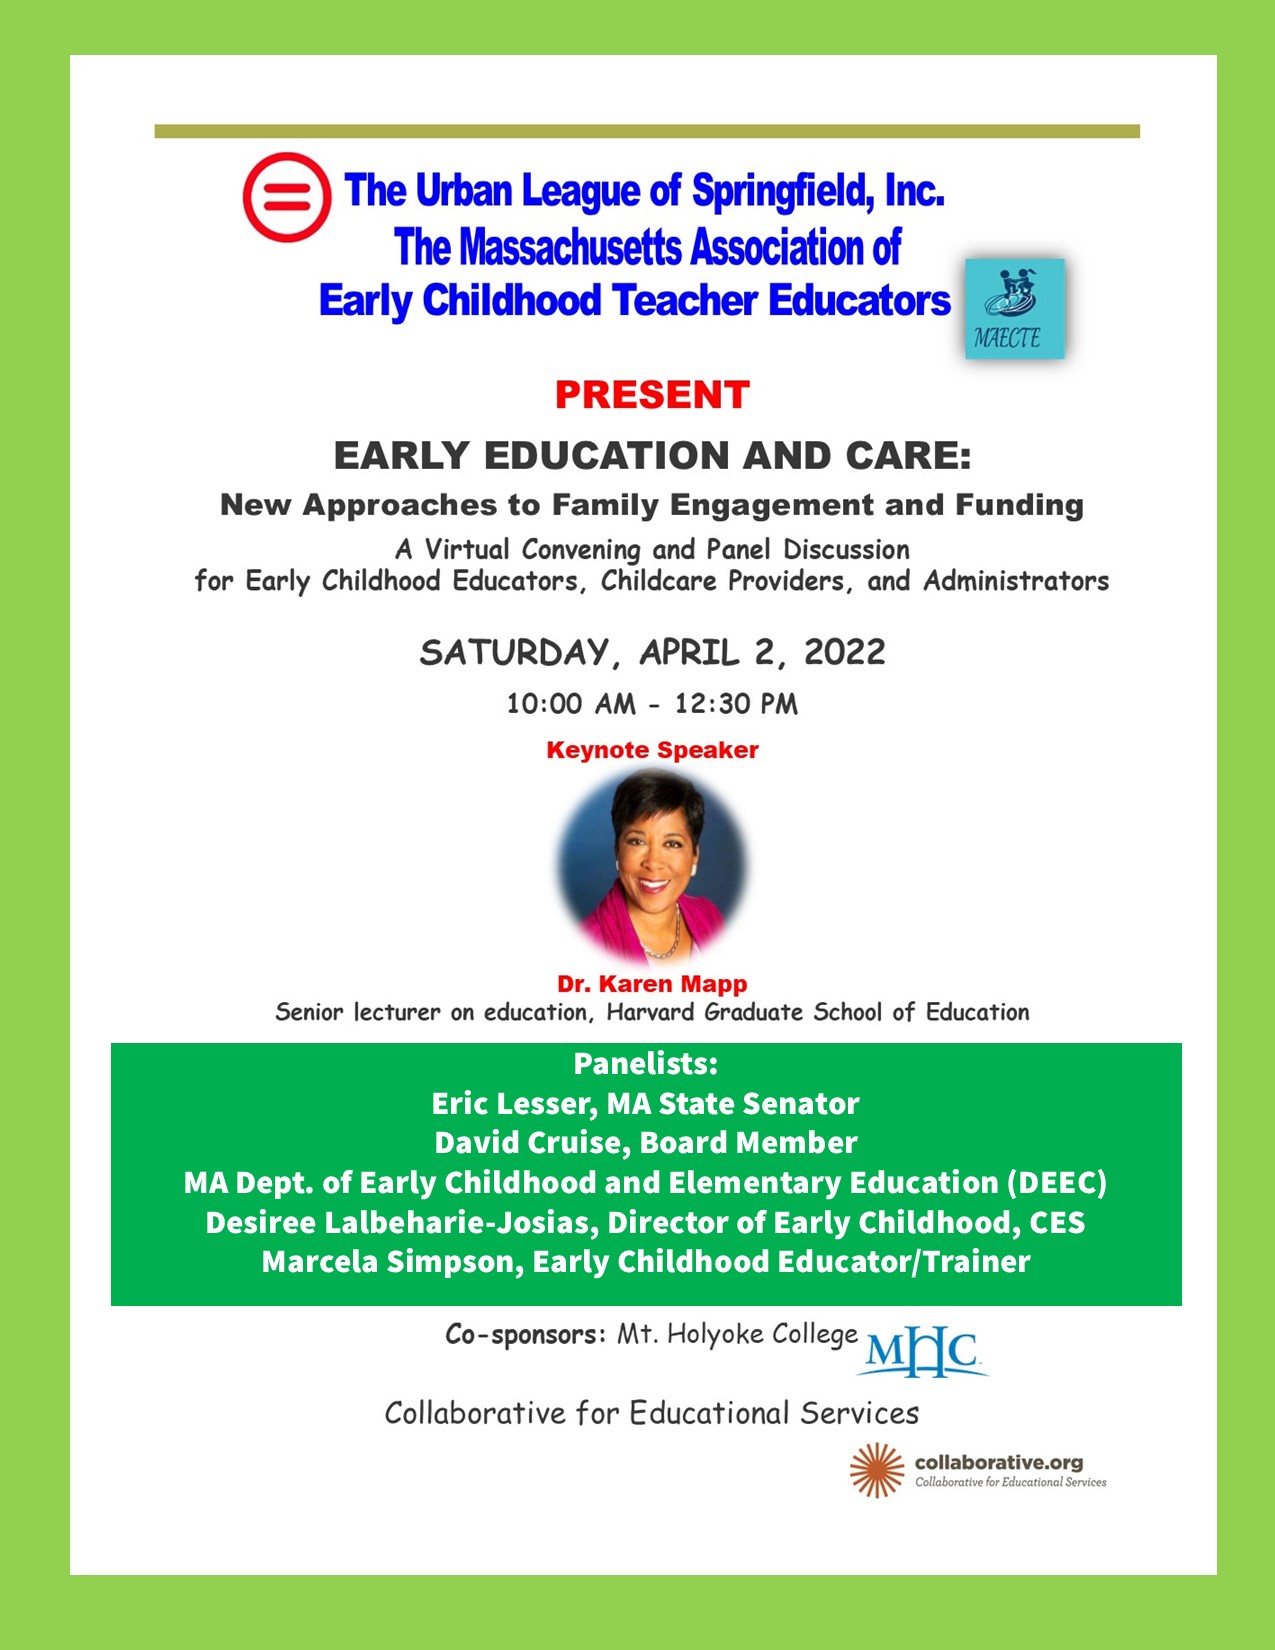 Early Education and Care Saturday April 2